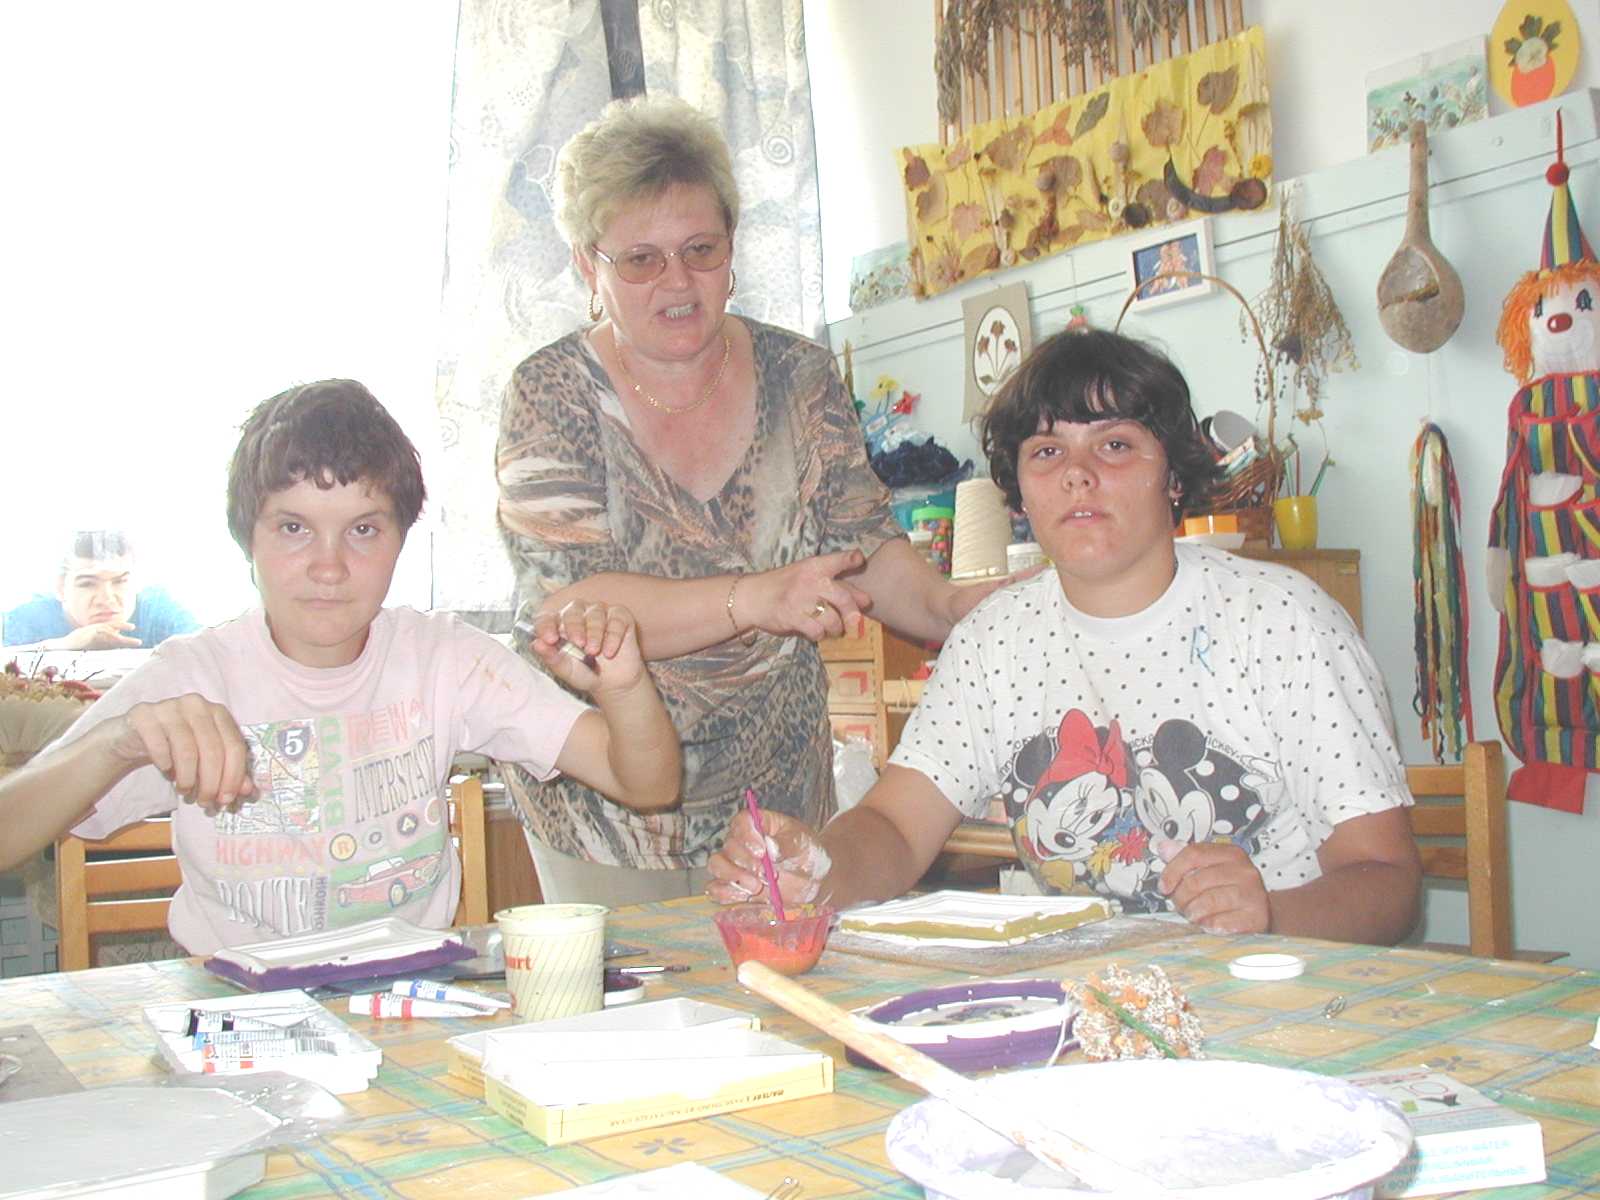 Mrs. Labady and children doing some art therapy at Barcs, Hungary.